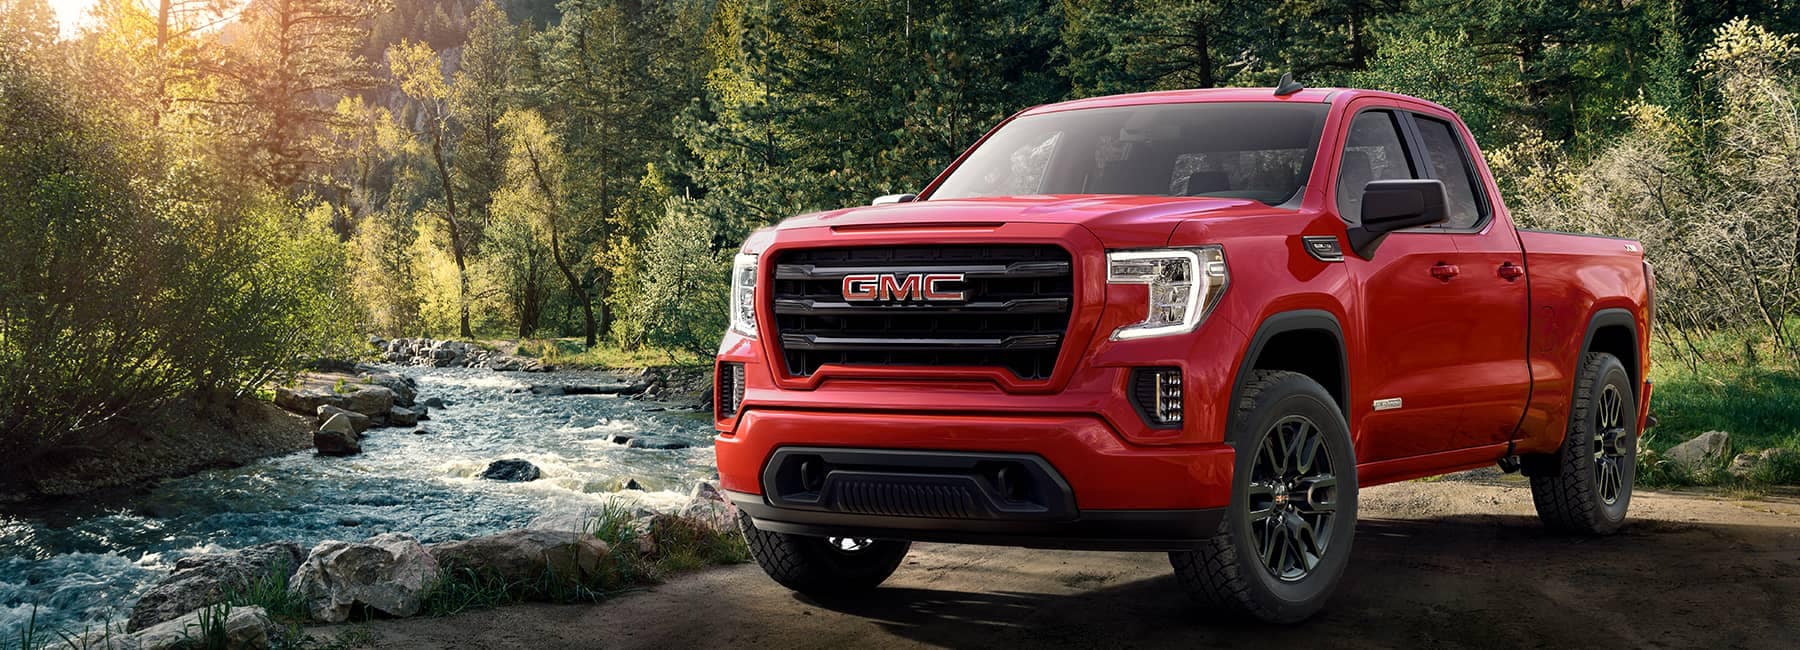 Capable And Strong: Meet The 2020 GMC Sierra 1500 | Woodhouse Buick GMC of  Omaha